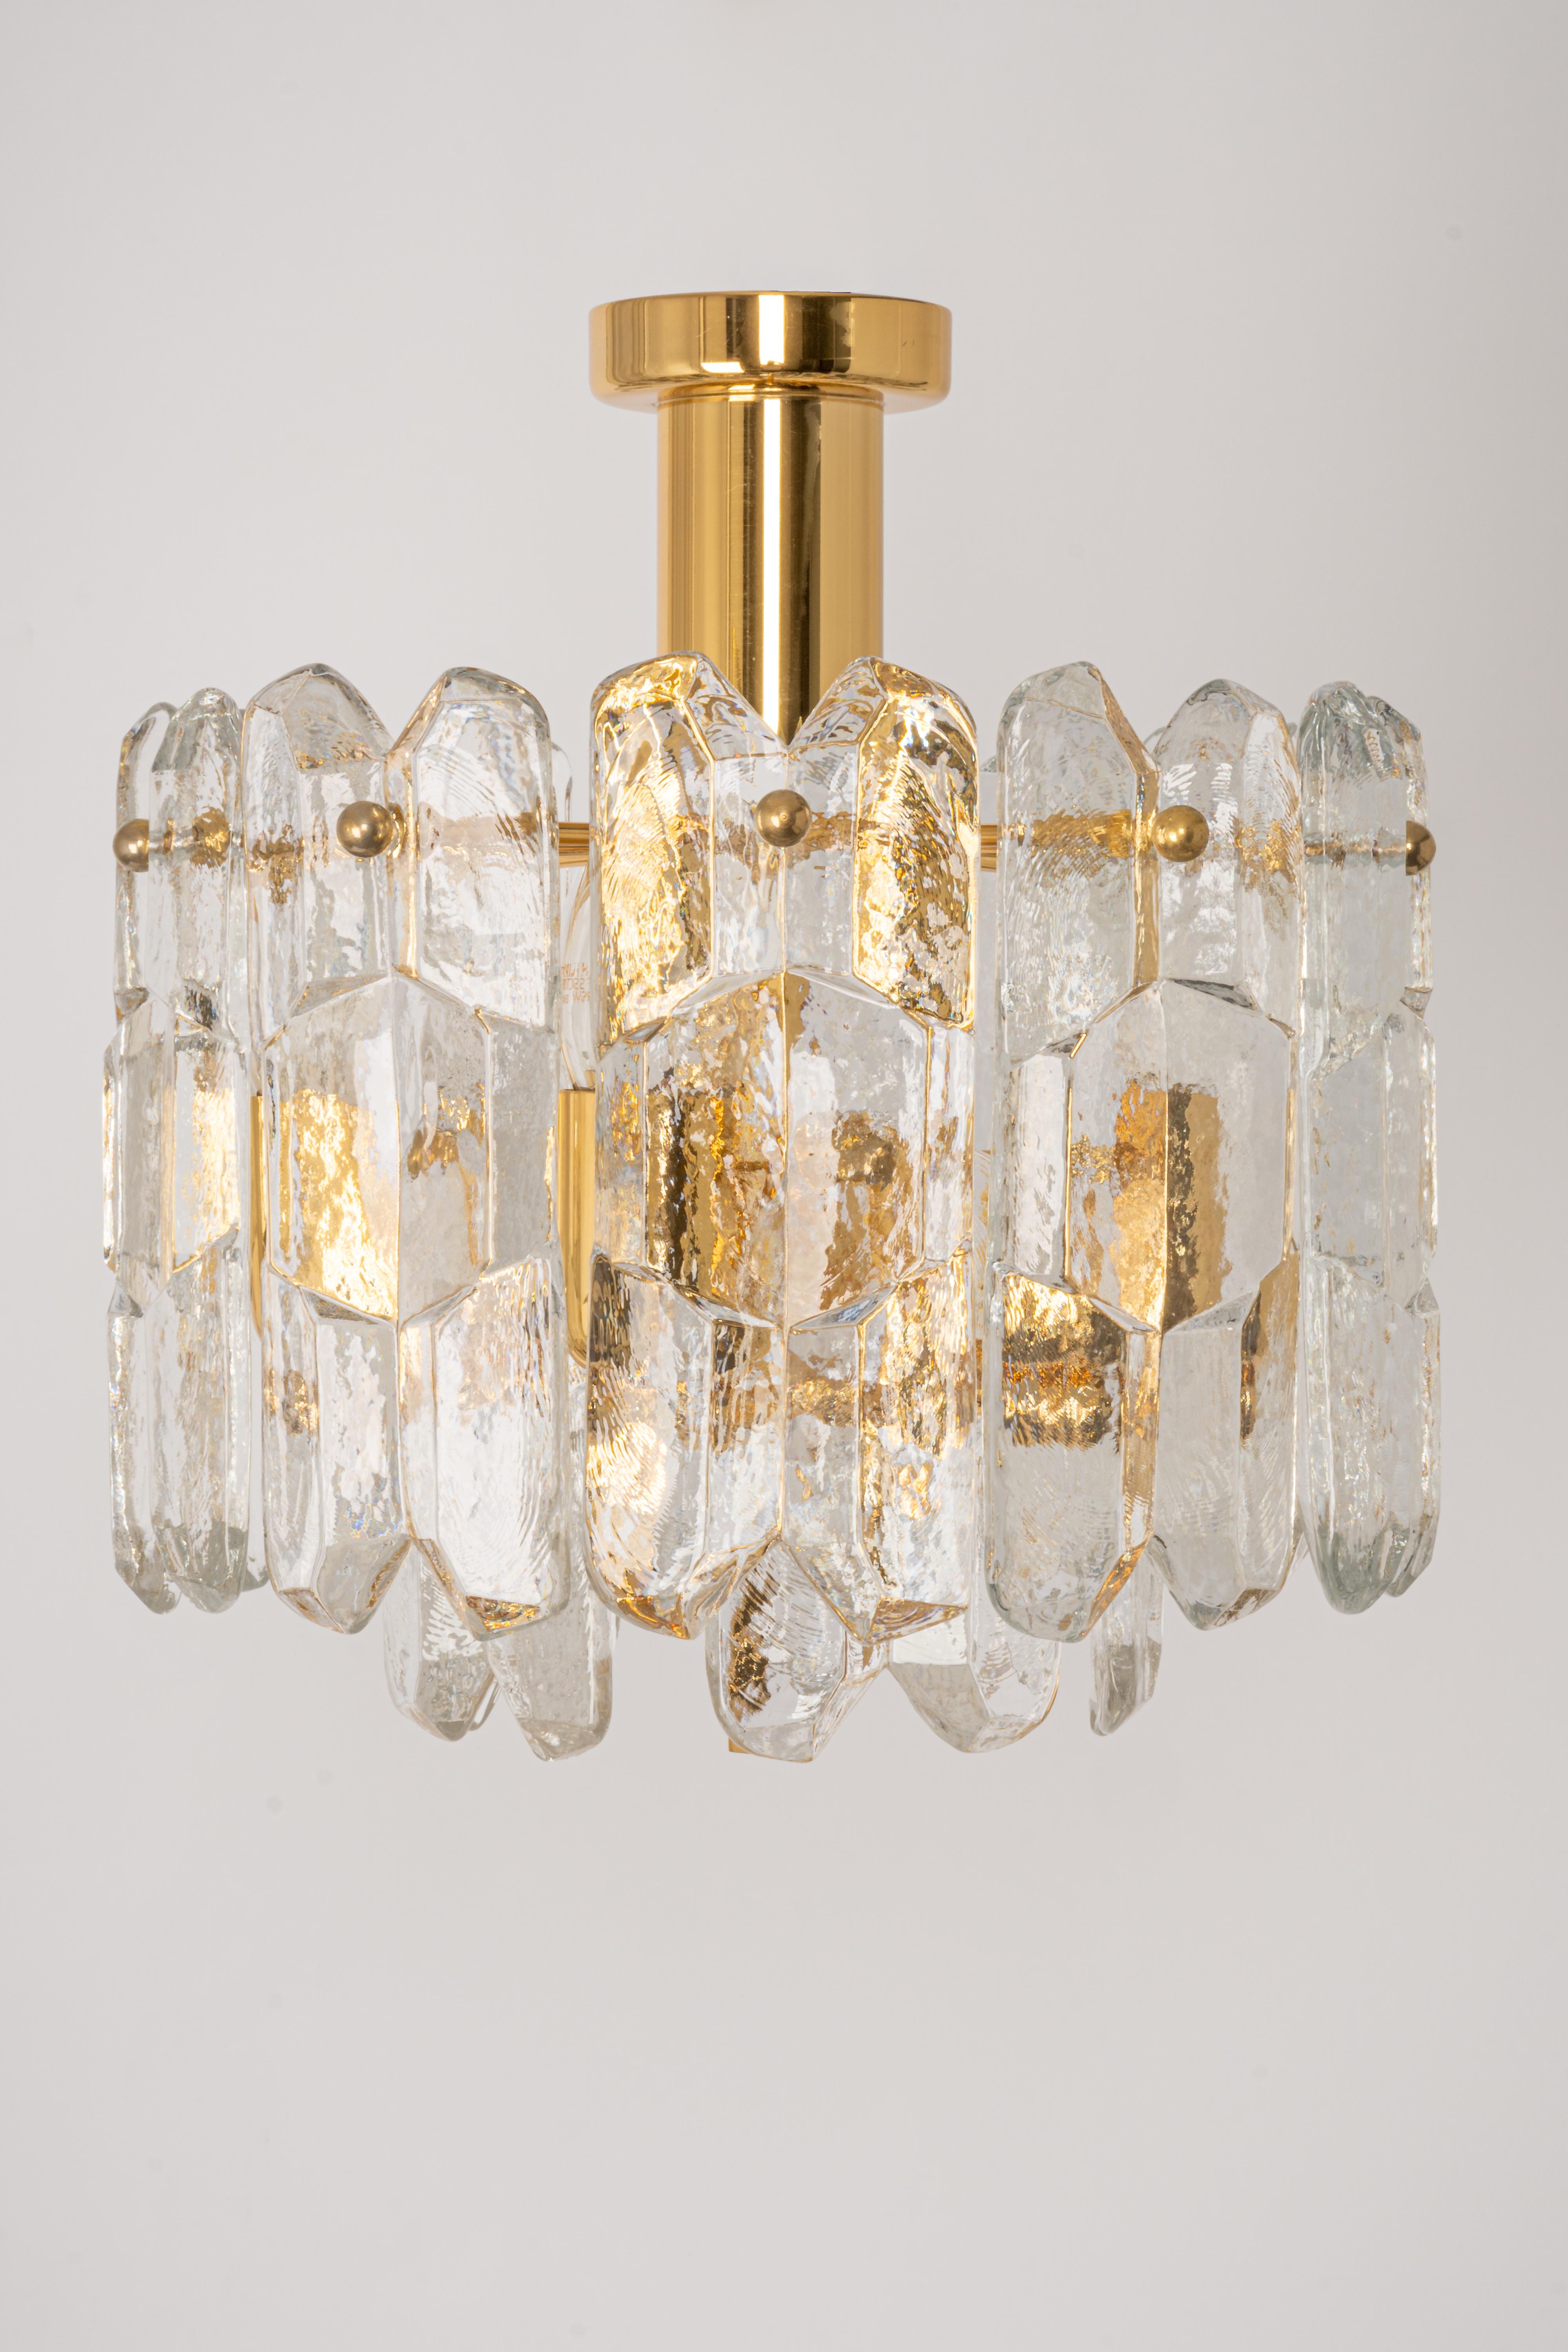 A Wonderful gilt brass light fixture comprises 15 crystal Murano glass pieces on a gilded brass frame. Its made by Kalmar (Serie: Palazzo), Austria, manufactured circa 1970-1979.

Two tiers structure gathers many structured glasses, beautifully